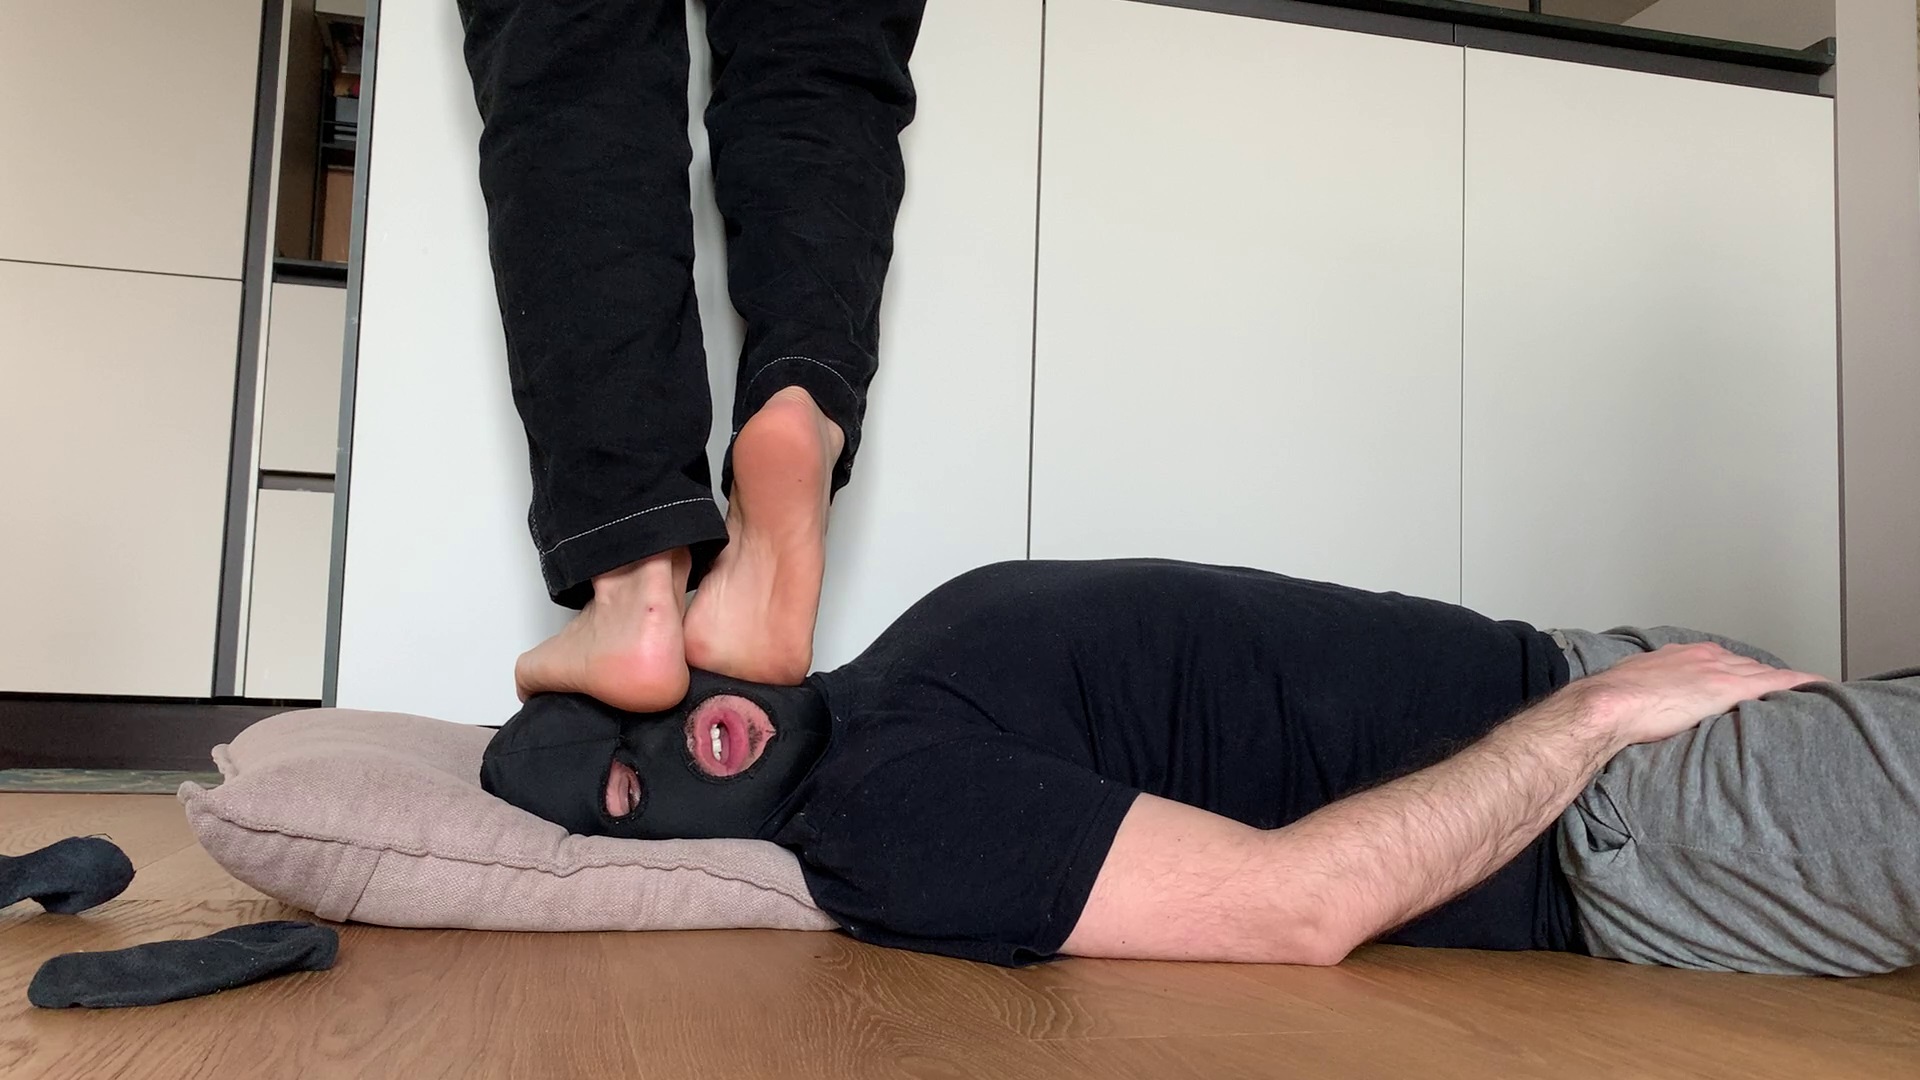 Walking on my slave's face